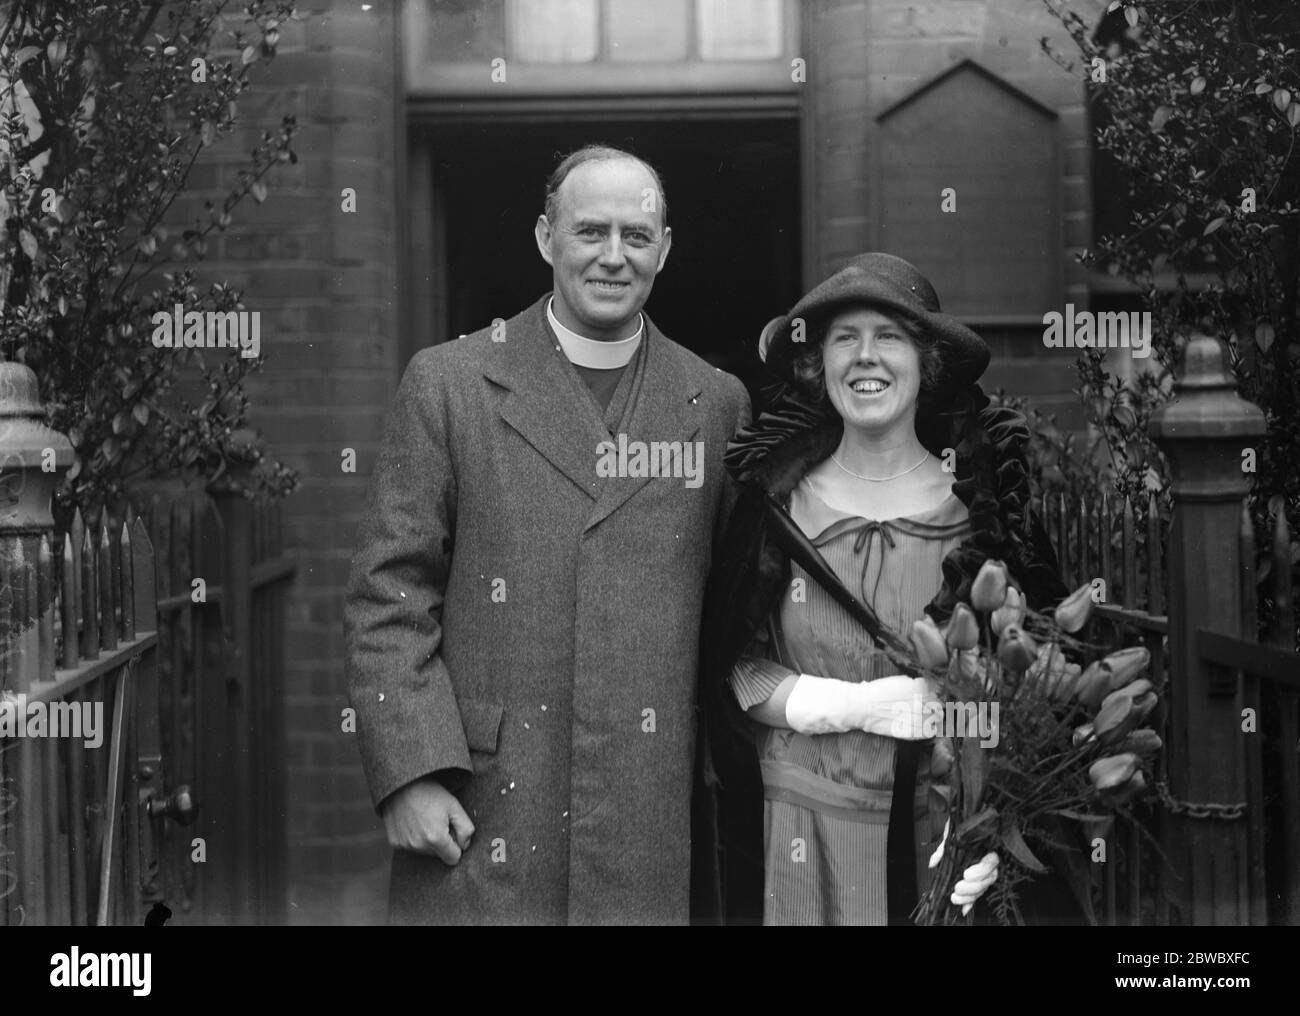 The king ' s chaplain weds Canon T G Rogers , M C , B D , Vicar of West Ham , and Chaplain to the King , and Miss M Inez Hartley were married at West Ham parish church 29 April 1924 Stock Photo